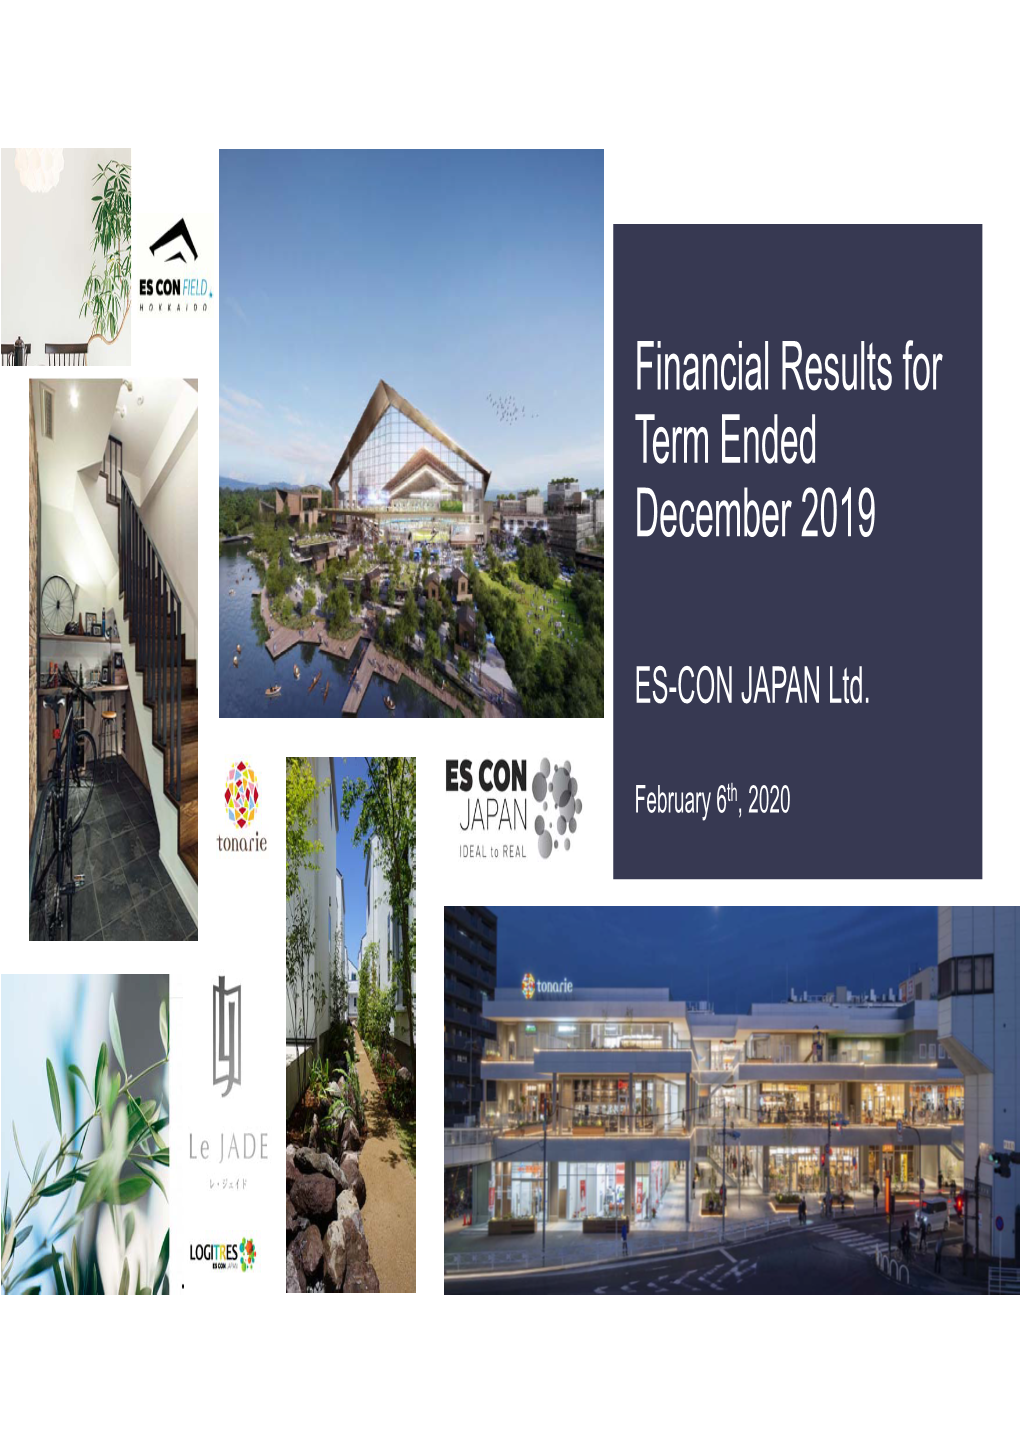 Financial Results for Term Ended December 2019